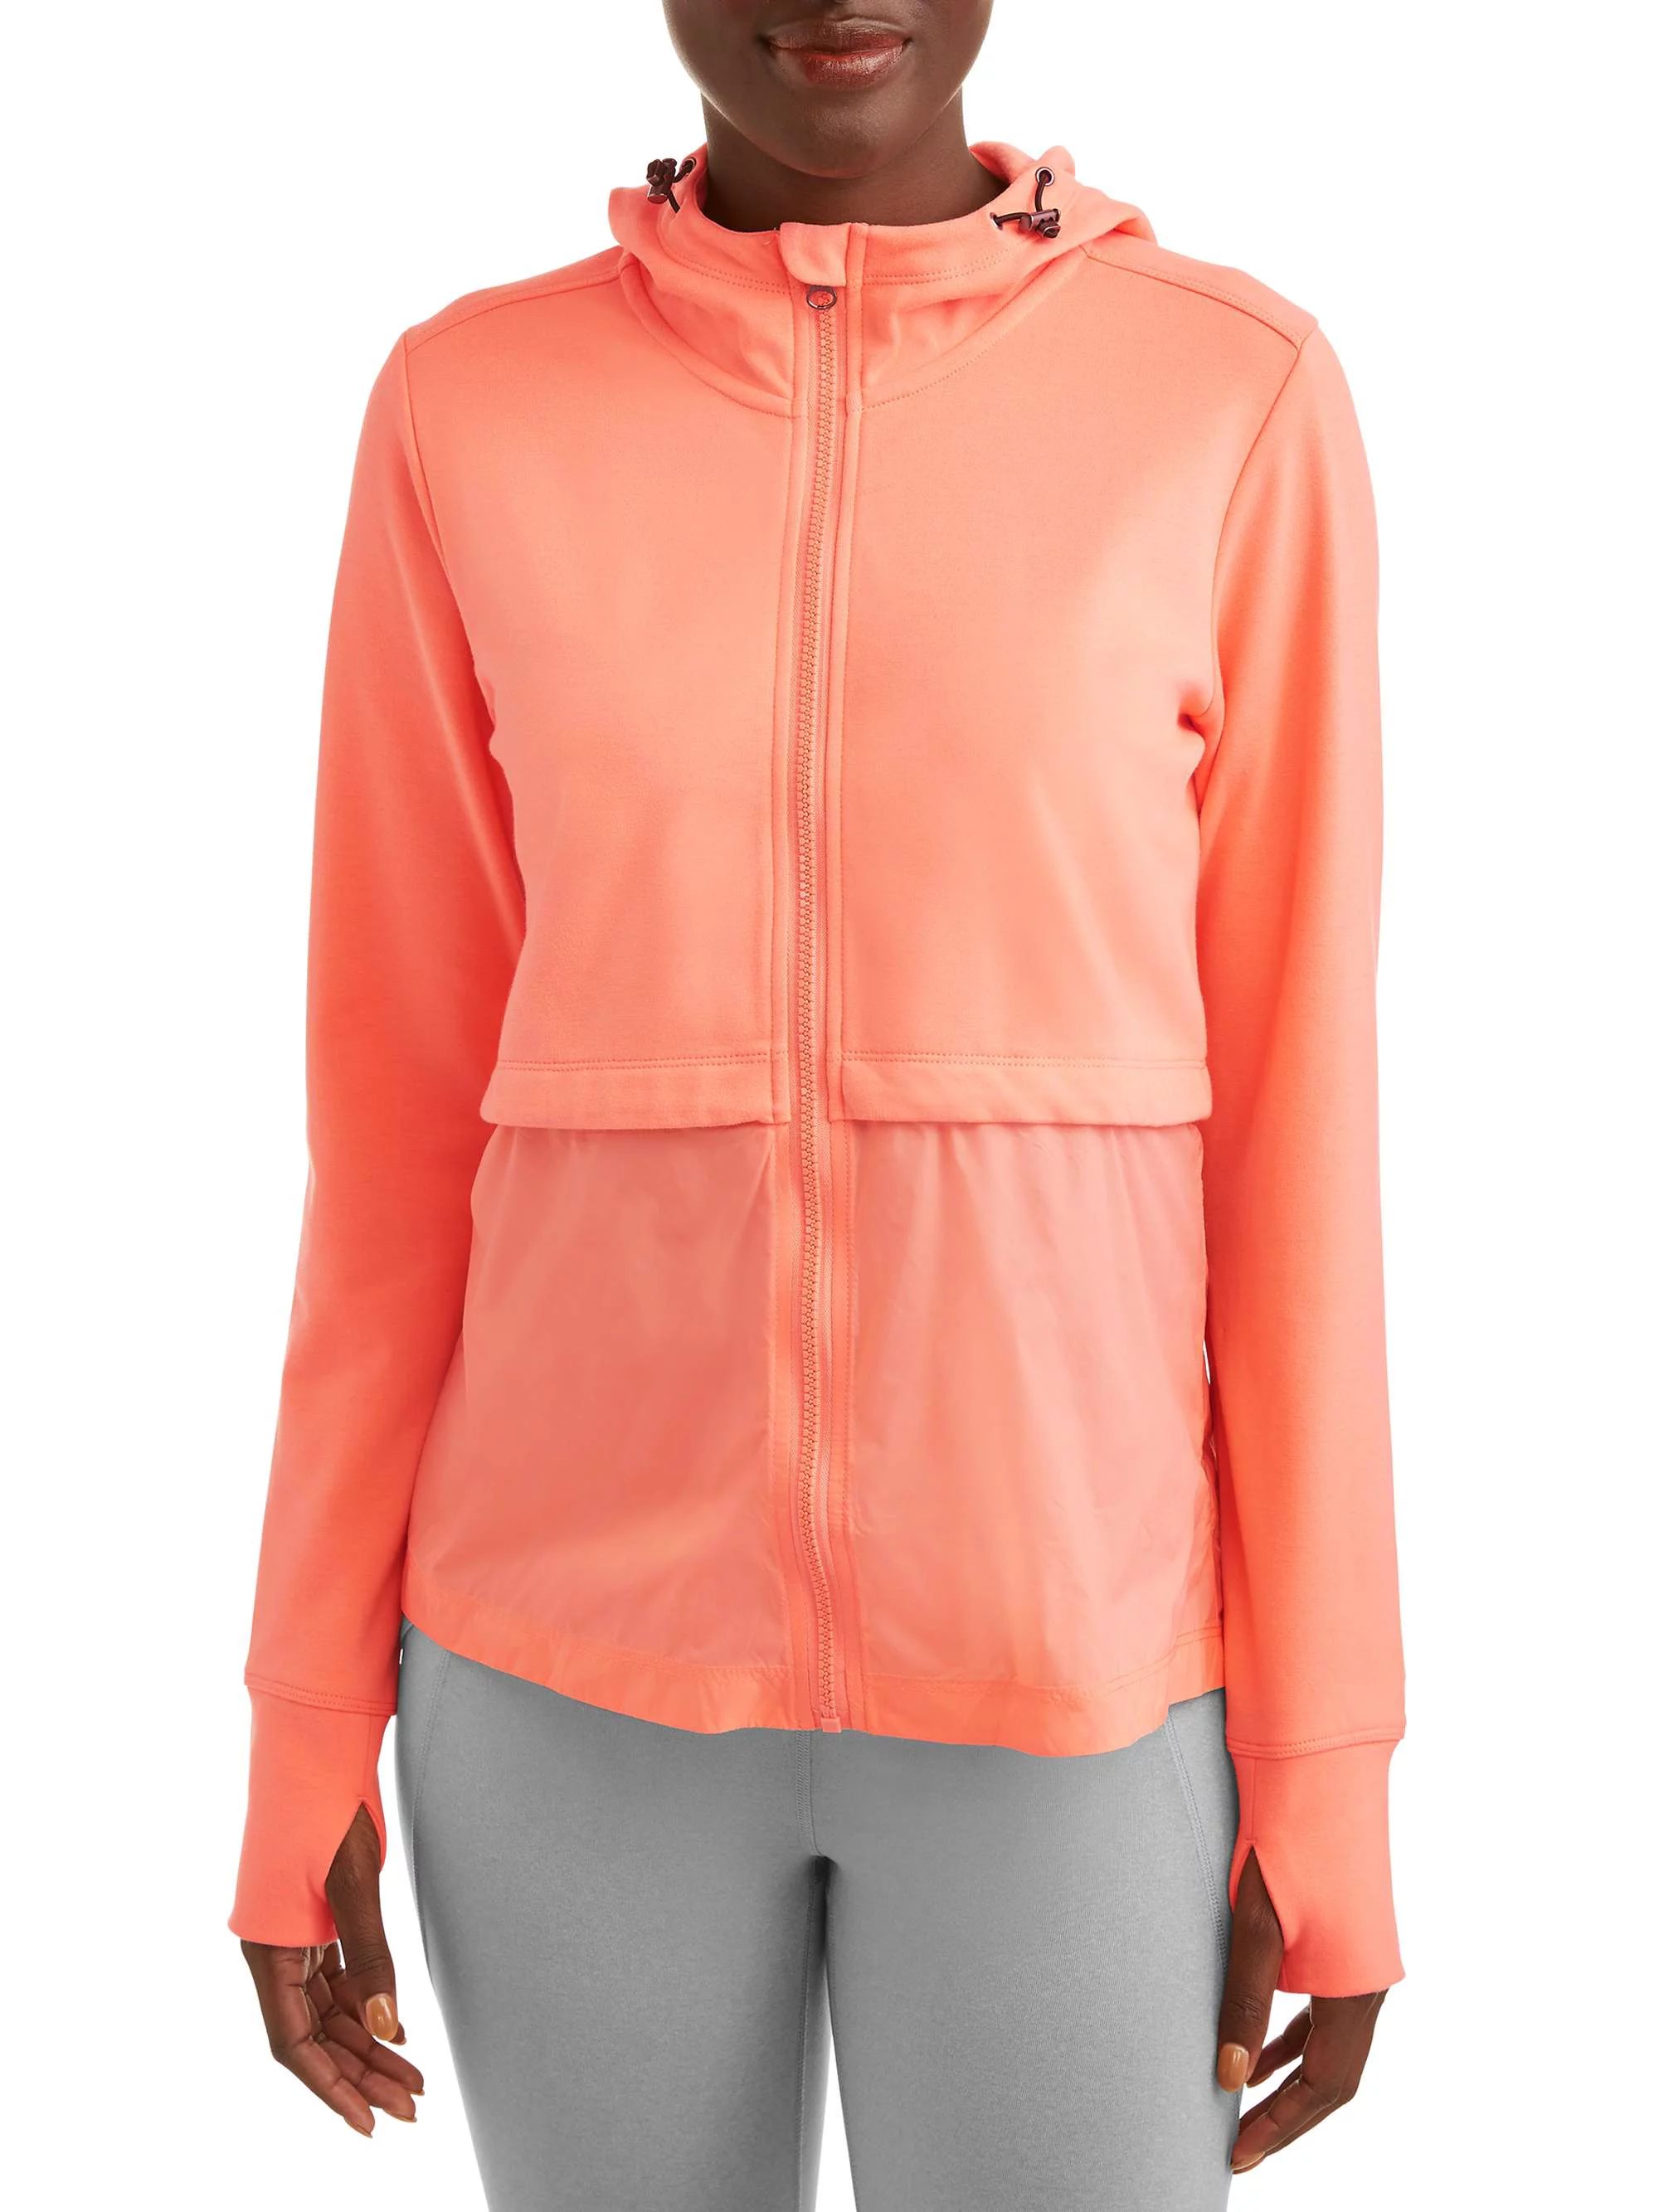 Athletic Works Women's Active Performance Knit Woven Zip Front Jacket | Walmart (US)